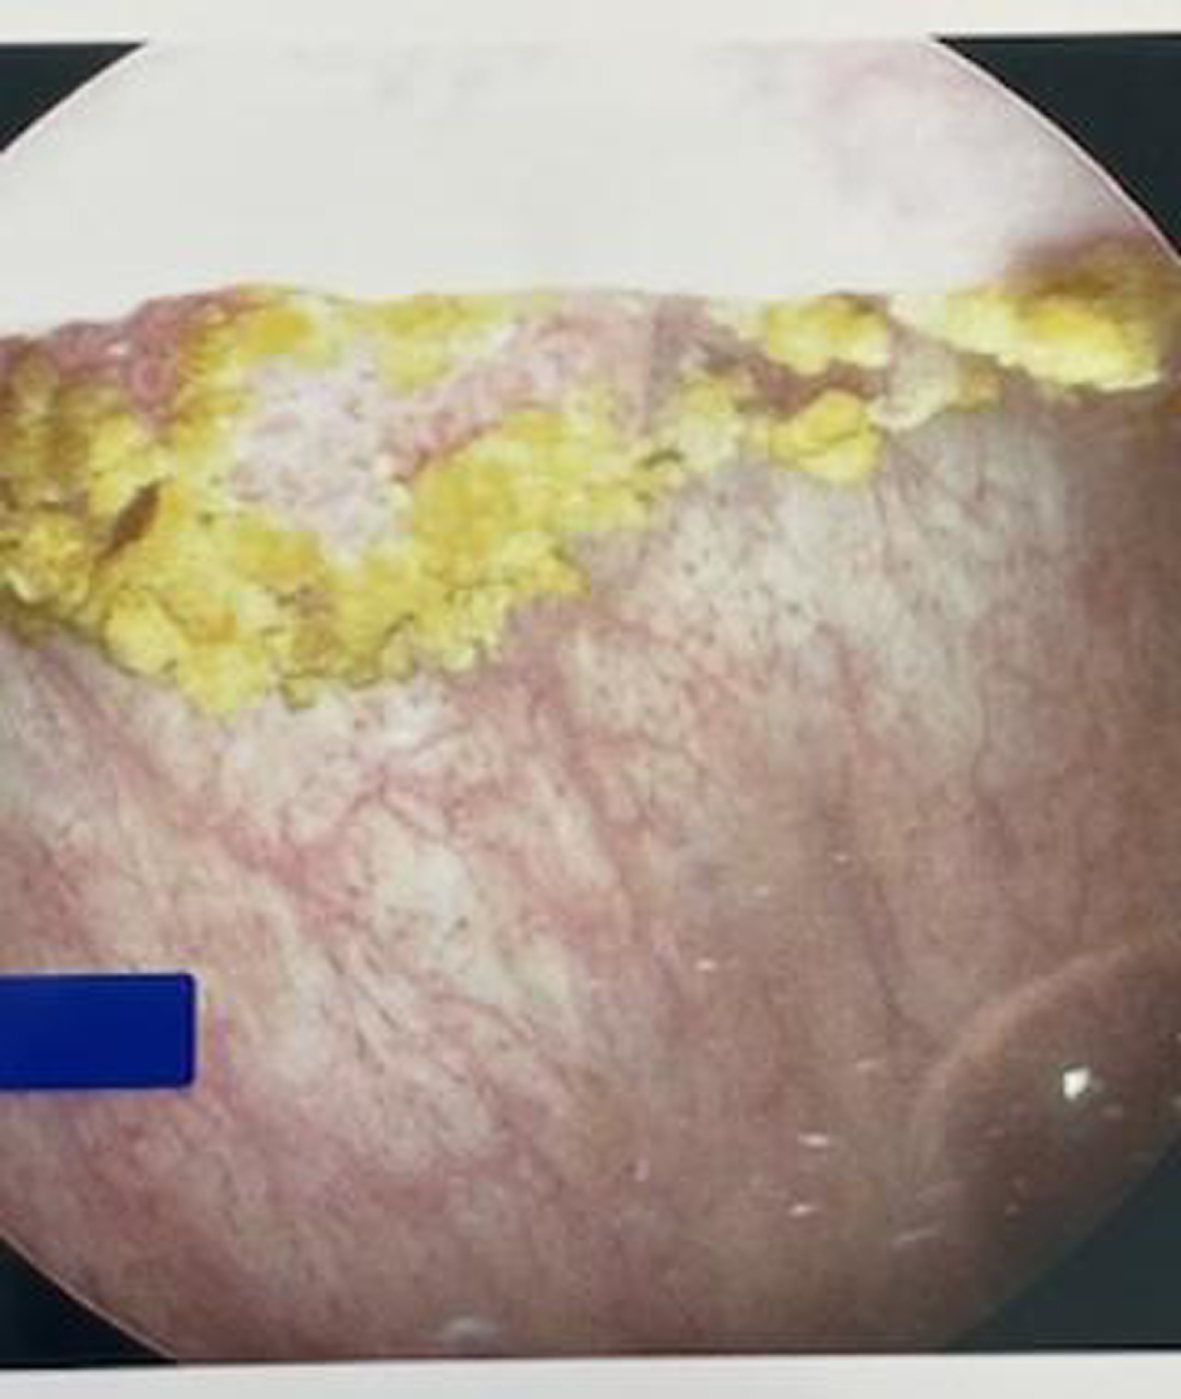 Flexible cystoscopy in office identifies a large anterior exophytic bladder tumor.